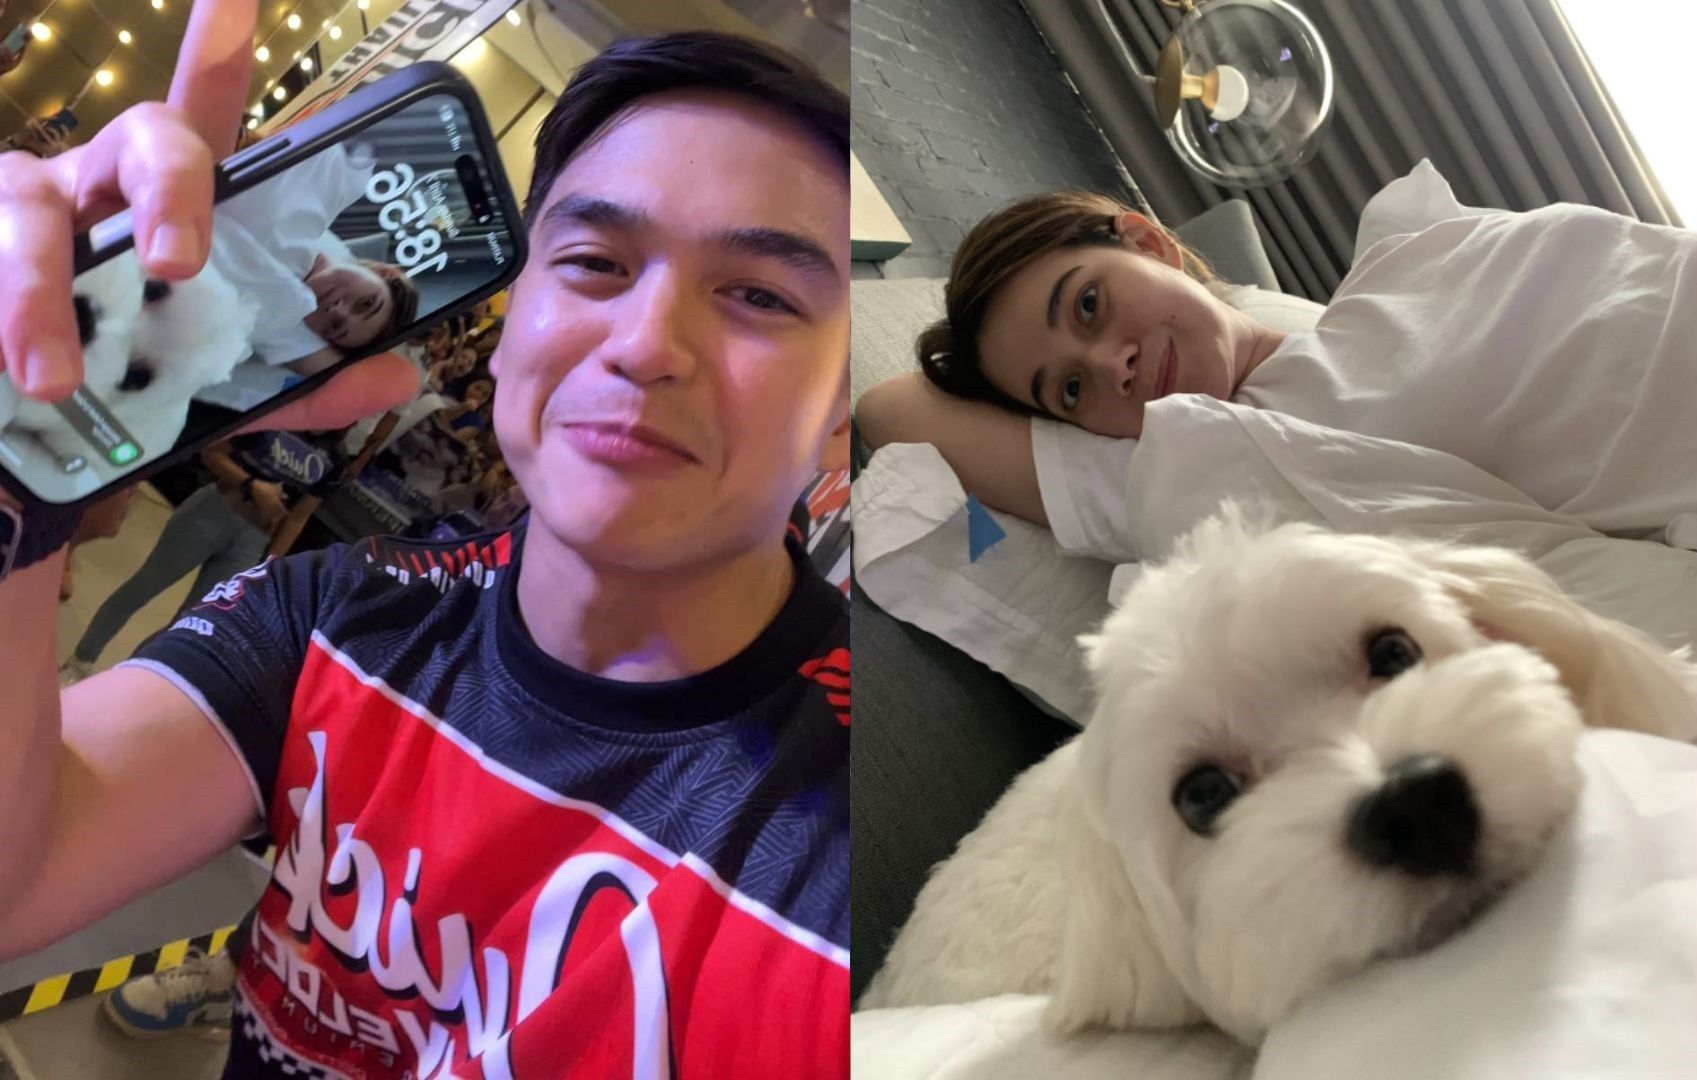 Bea Alonzo still Dominic Roque’s phone wallpaper 2 months after wedding called off